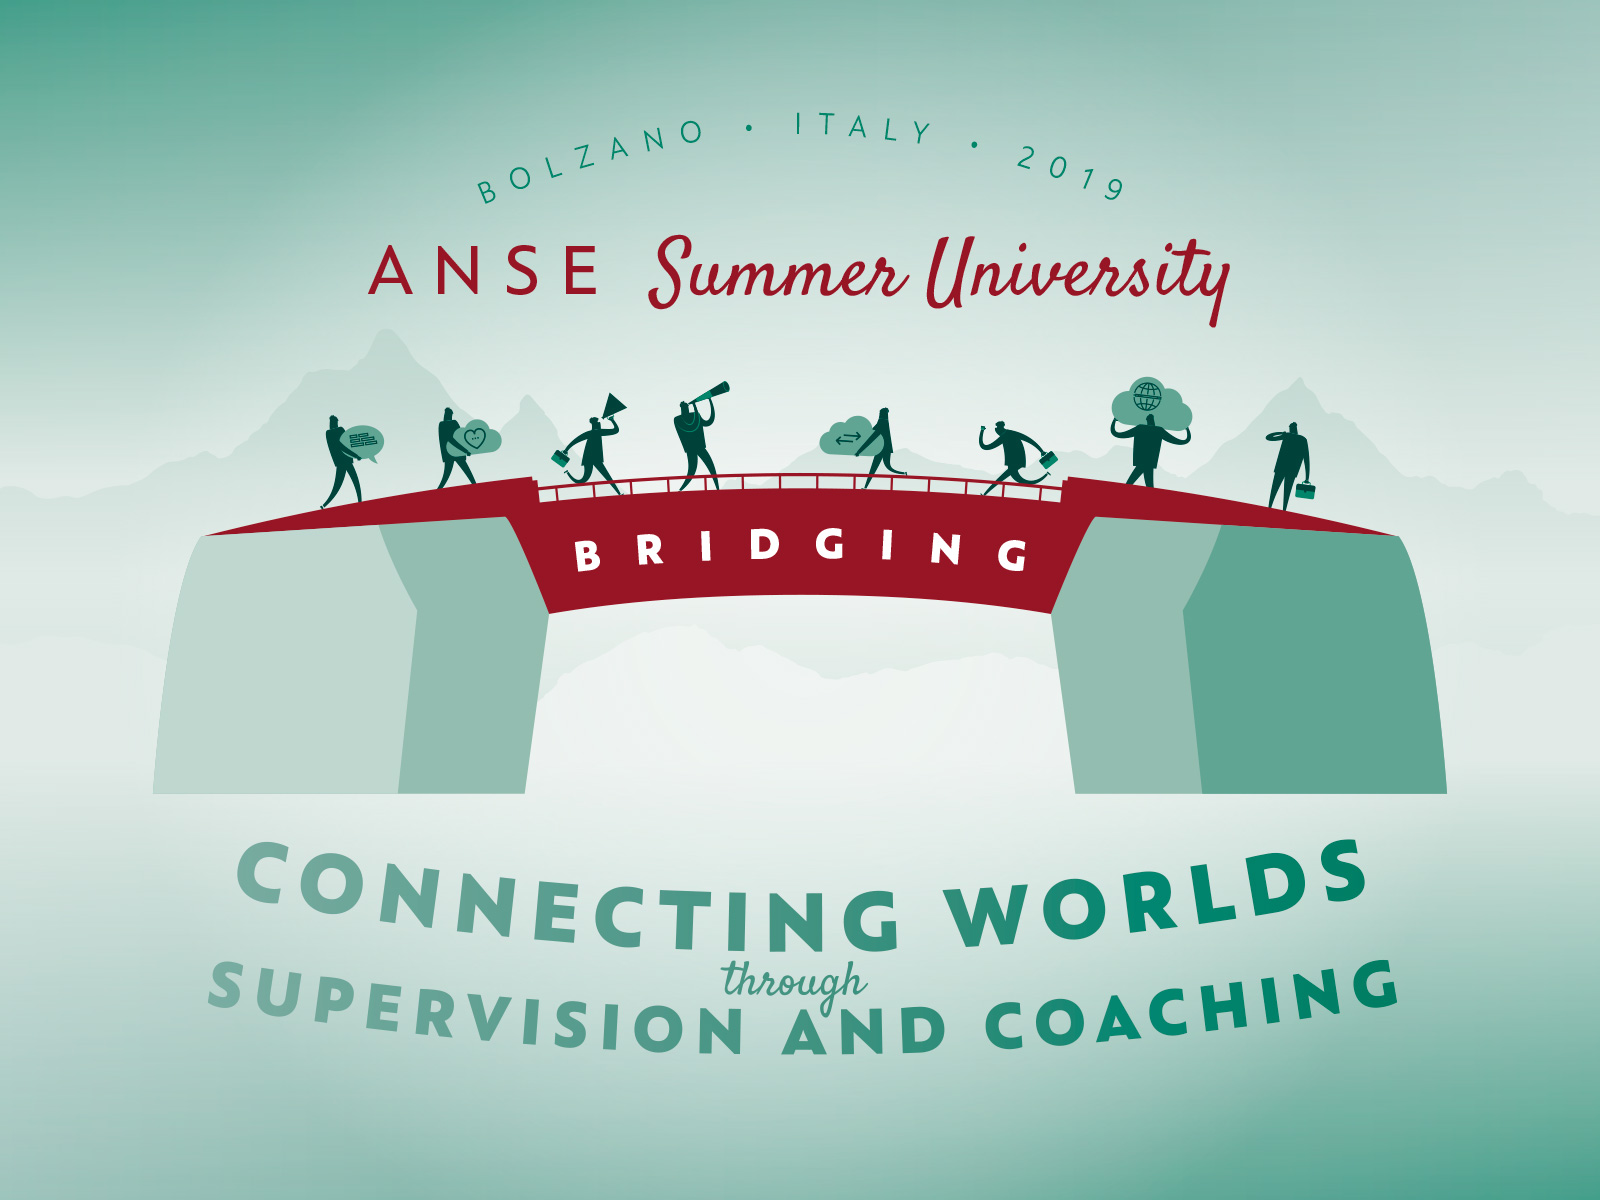 ANSE Summer University 2019 in Bolzano, Italy. Organized by BSC ASC Supervision and Coaching. Illustration Design by adpassion, Waldemar Kerschbaumer.